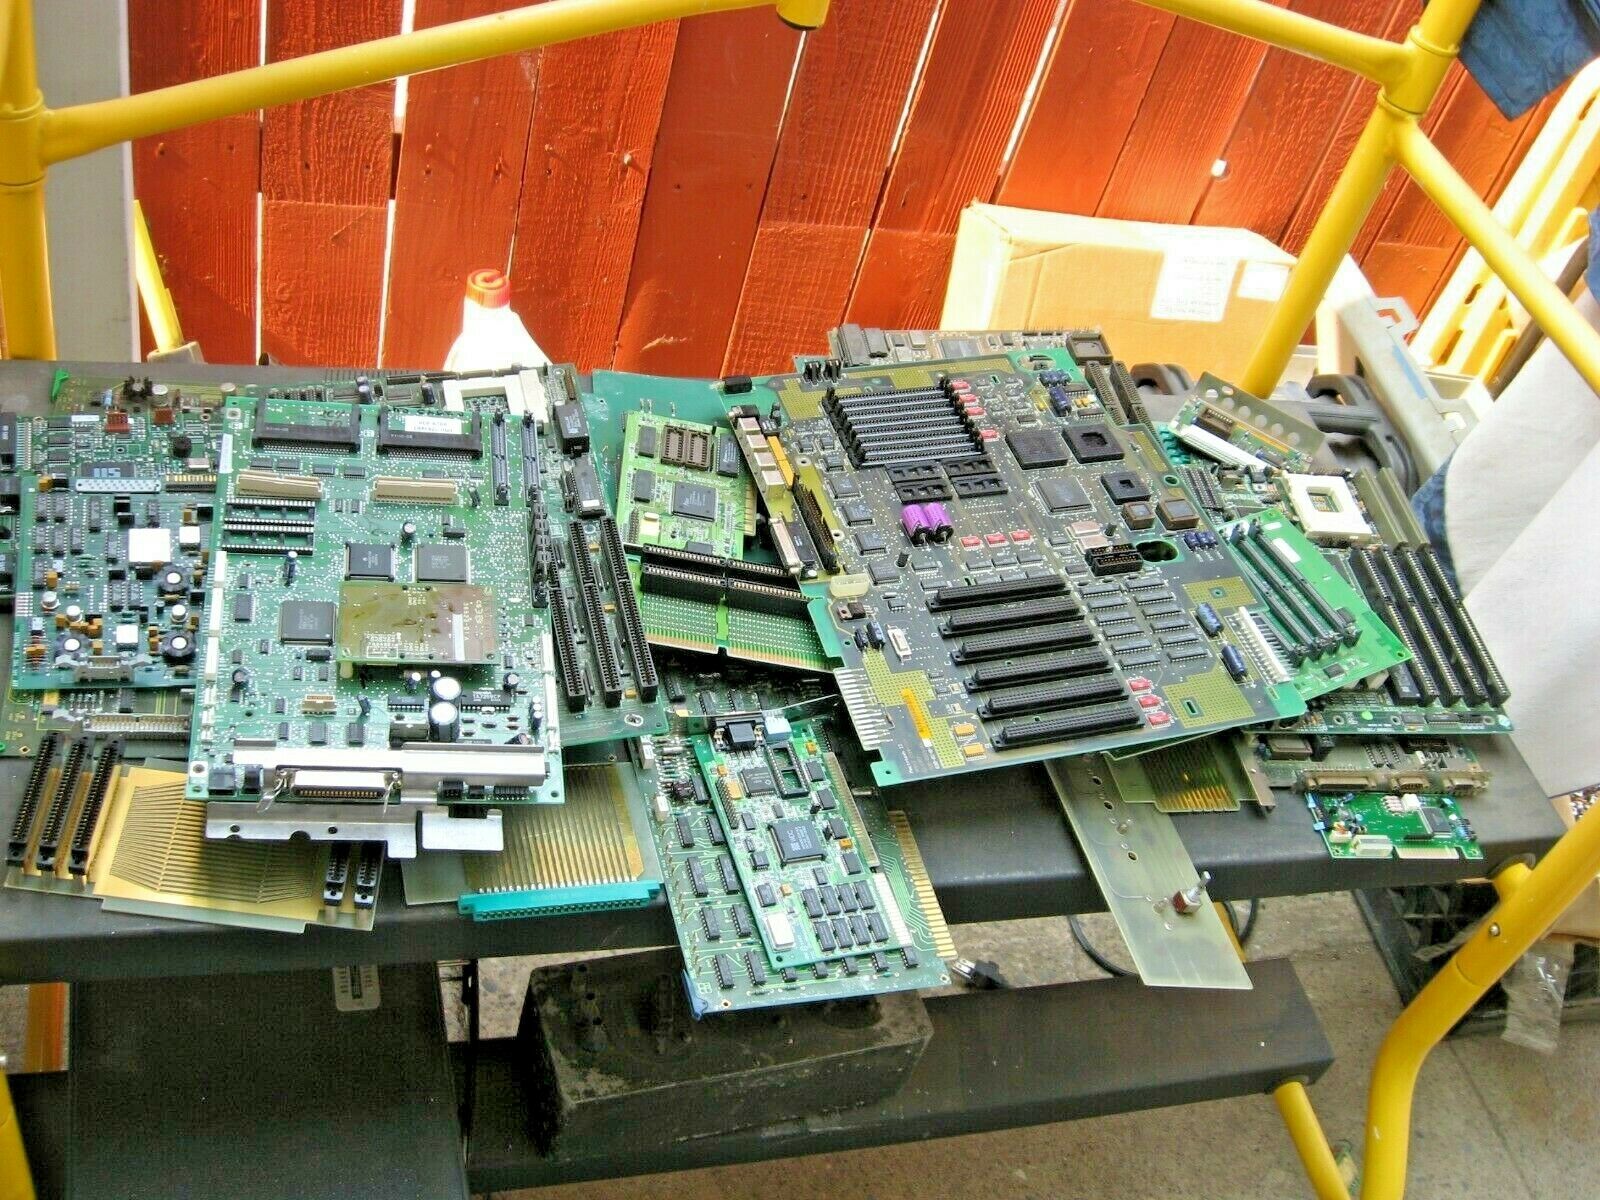 33 Lbs Of High Yield Vtg Computer Boards - Scrap Gold/silver - 1970's To 90's